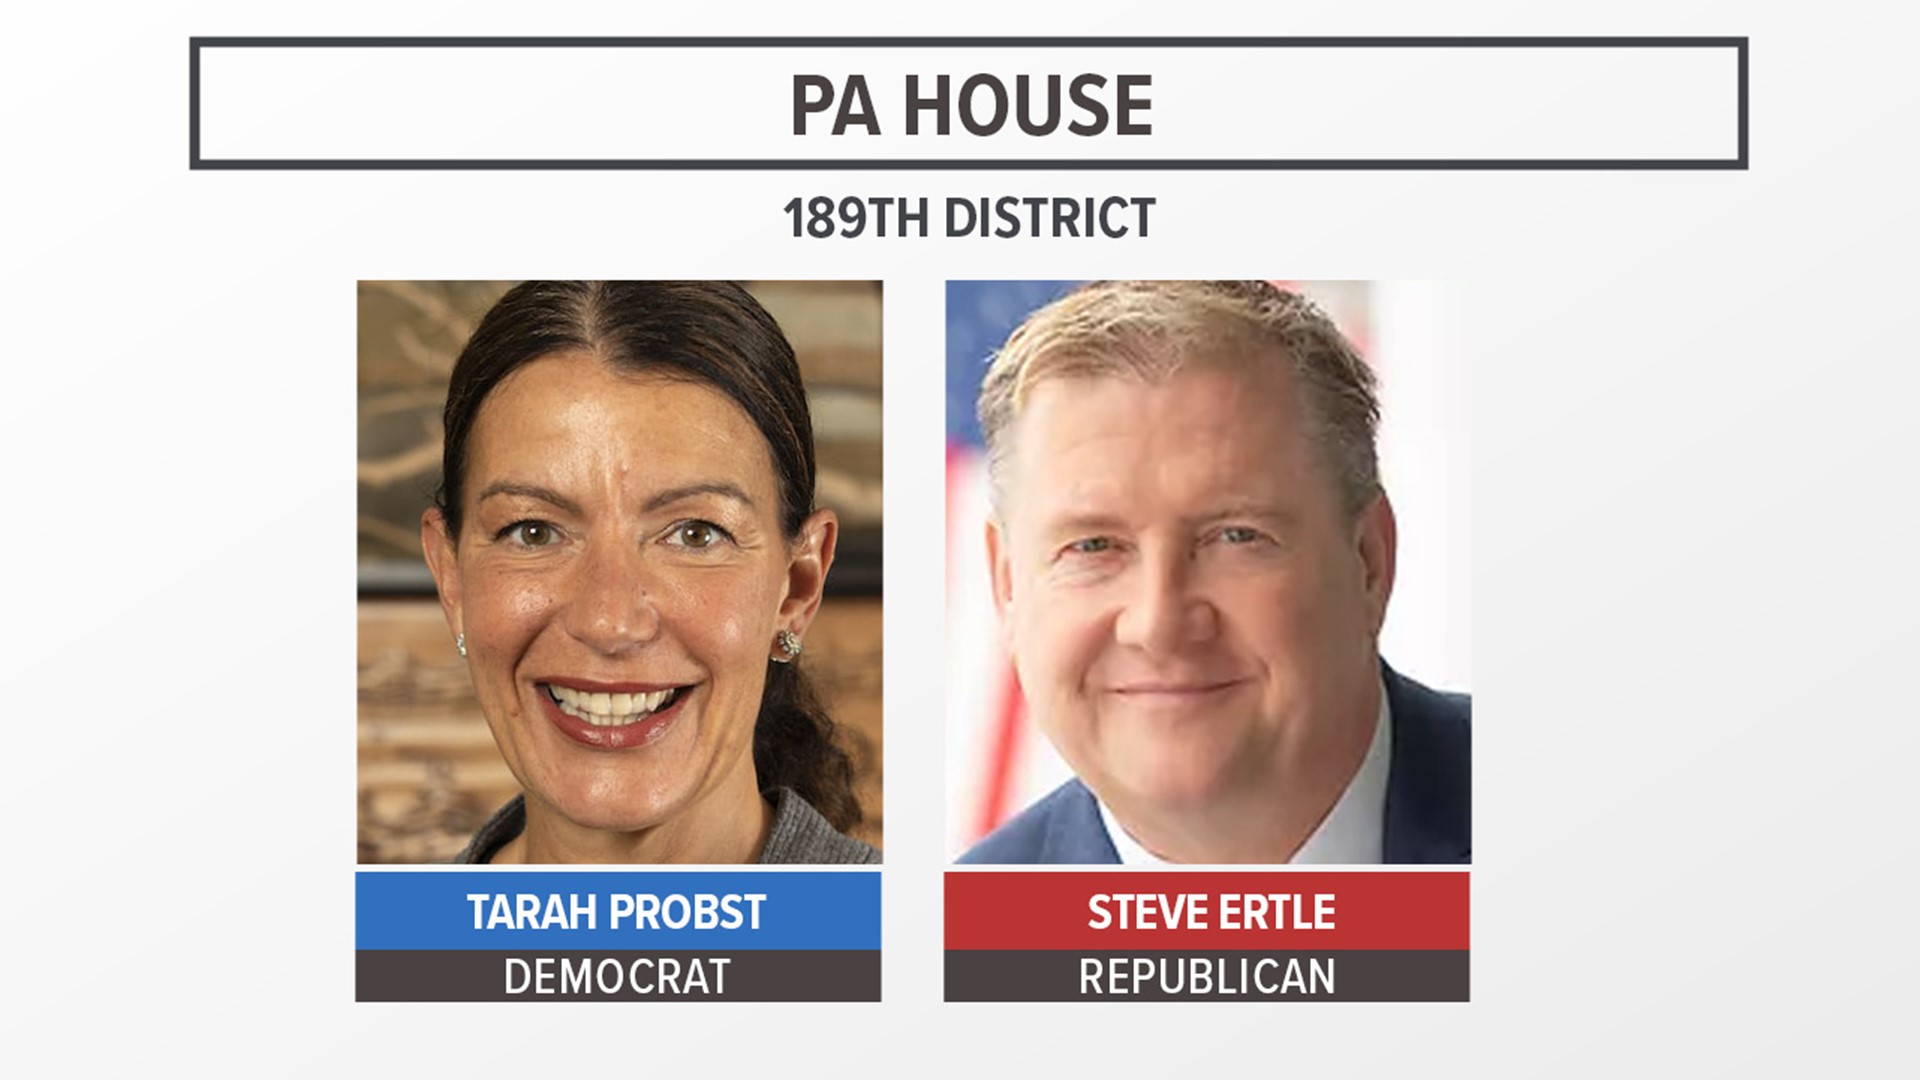 Pennsylvania's general election is Tuesday, November 8.